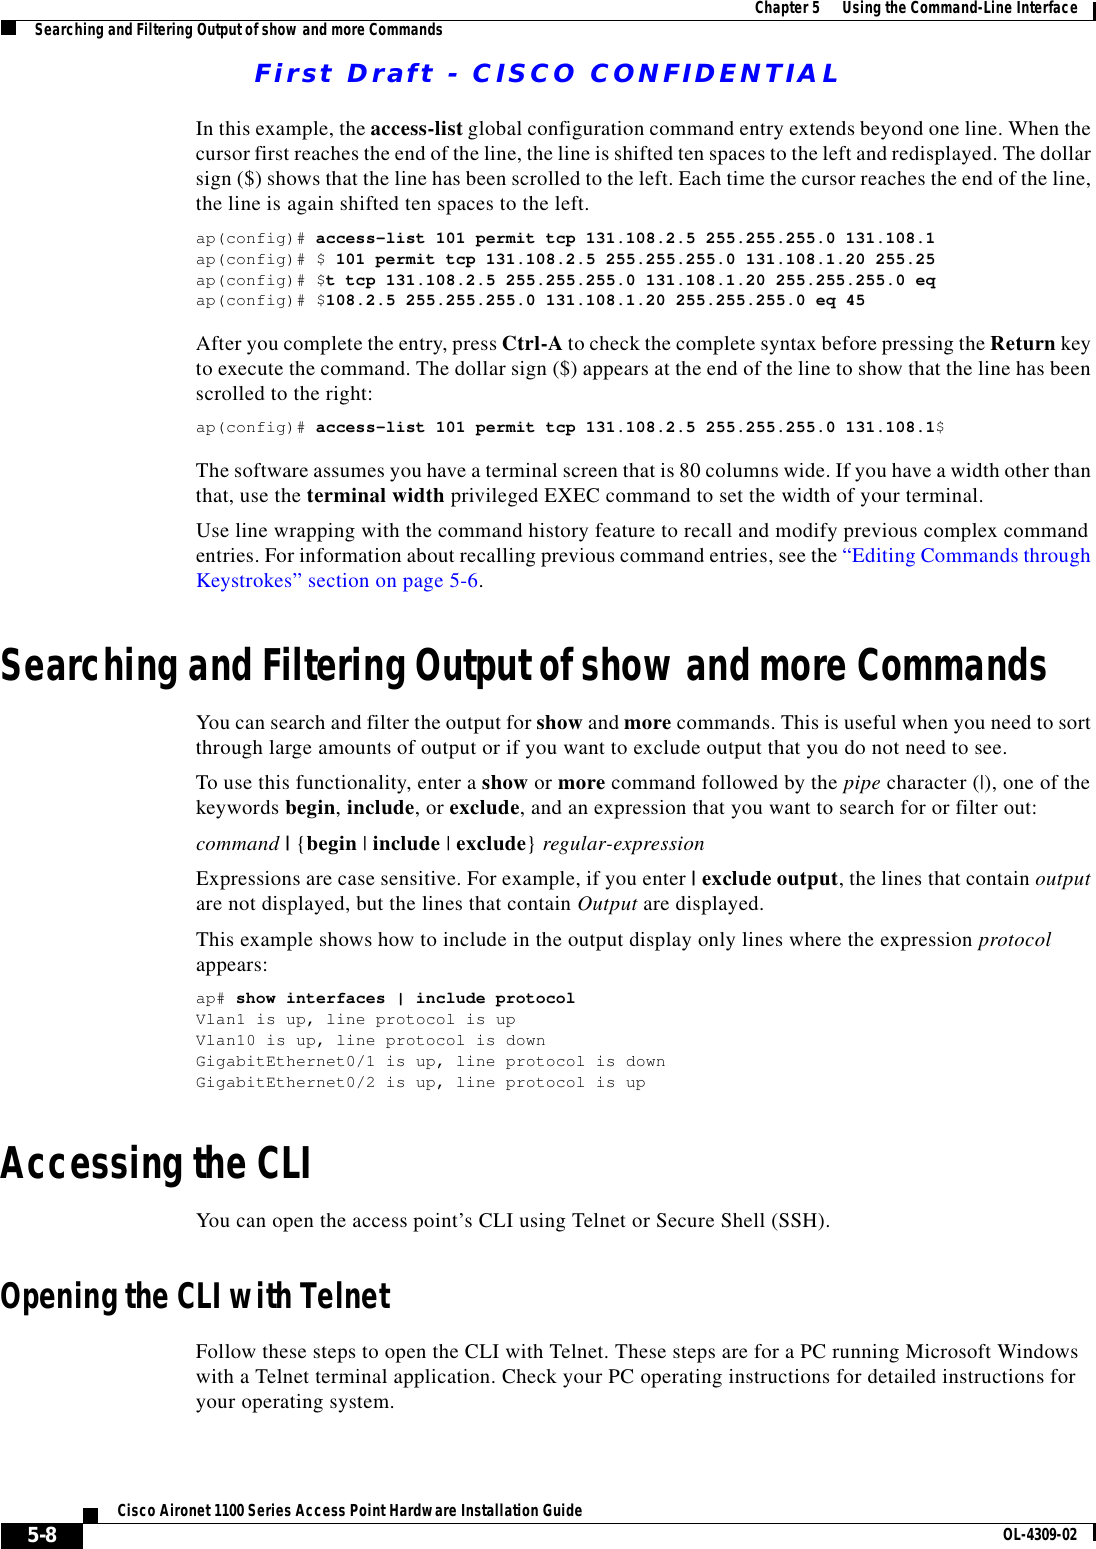 First Draft - CISCO CONFIDENTIAL5-8Cisco Aironet 1100 Series Access Point Hardware Installation Guide OL-4309-02Chapter 5      Using the Command-Line InterfaceSearching and Filtering Output of show and more CommandsIn this example, the access-list global configuration command entry extends beyond one line. When the cursor first reaches the end of the line, the line is shifted ten spaces to the left and redisplayed. The dollar sign ($) shows that the line has been scrolled to the left. Each time the cursor reaches the end of the line, the line is again shifted ten spaces to the left. ap(config)# access-list 101 permit tcp 131.108.2.5 255.255.255.0 131.108.1ap(config)# $ 101 permit tcp 131.108.2.5 255.255.255.0 131.108.1.20 255.25ap(config)# $t tcp 131.108.2.5 255.255.255.0 131.108.1.20 255.255.255.0 eqap(config)# $108.2.5 255.255.255.0 131.108.1.20 255.255.255.0 eq 45 After you complete the entry, press Ctrl-A to check the complete syntax before pressing the Return key to execute the command. The dollar sign ($) appears at the end of the line to show that the line has been scrolled to the right:ap(config)# access-list 101 permit tcp 131.108.2.5 255.255.255.0 131.108.1$The software assumes you have a terminal screen that is 80 columns wide. If you have a width other than that, use the terminal width privileged EXEC command to set the width of your terminal.Use line wrapping with the command history feature to recall and modify previous complex command entries. For information about recalling previous command entries, see the “Editing Commands through Keystrokes” section on page 5-6.Searching and Filtering Output of show and more CommandsYou can search and filter the output for show and more commands. This is useful when you need to sort through large amounts of output or if you want to exclude output that you do not need to see.To use this functionality, enter a show or more command followed by the pipe character (|), one of the keywords begin, include, or exclude, and an expression that you want to search for or filter out:command | {begin | include | exclude} regular-expressionExpressions are case sensitive. For example, if you enter | exclude output, the lines that contain output are not displayed, but the lines that contain Output are displayed.This example shows how to include in the output display only lines where the expression protocol appears:ap# show interfaces | include protocolVlan1 is up, line protocol is upVlan10 is up, line protocol is downGigabitEthernet0/1 is up, line protocol is downGigabitEthernet0/2 is up, line protocol is up Accessing the CLIYou can open the access point’s CLI using Telnet or Secure Shell (SSH). Opening the CLI with TelnetFollow these steps to open the CLI with Telnet. These steps are for a PC running Microsoft Windows with a Telnet terminal application. Check your PC operating instructions for detailed instructions for your operating system.